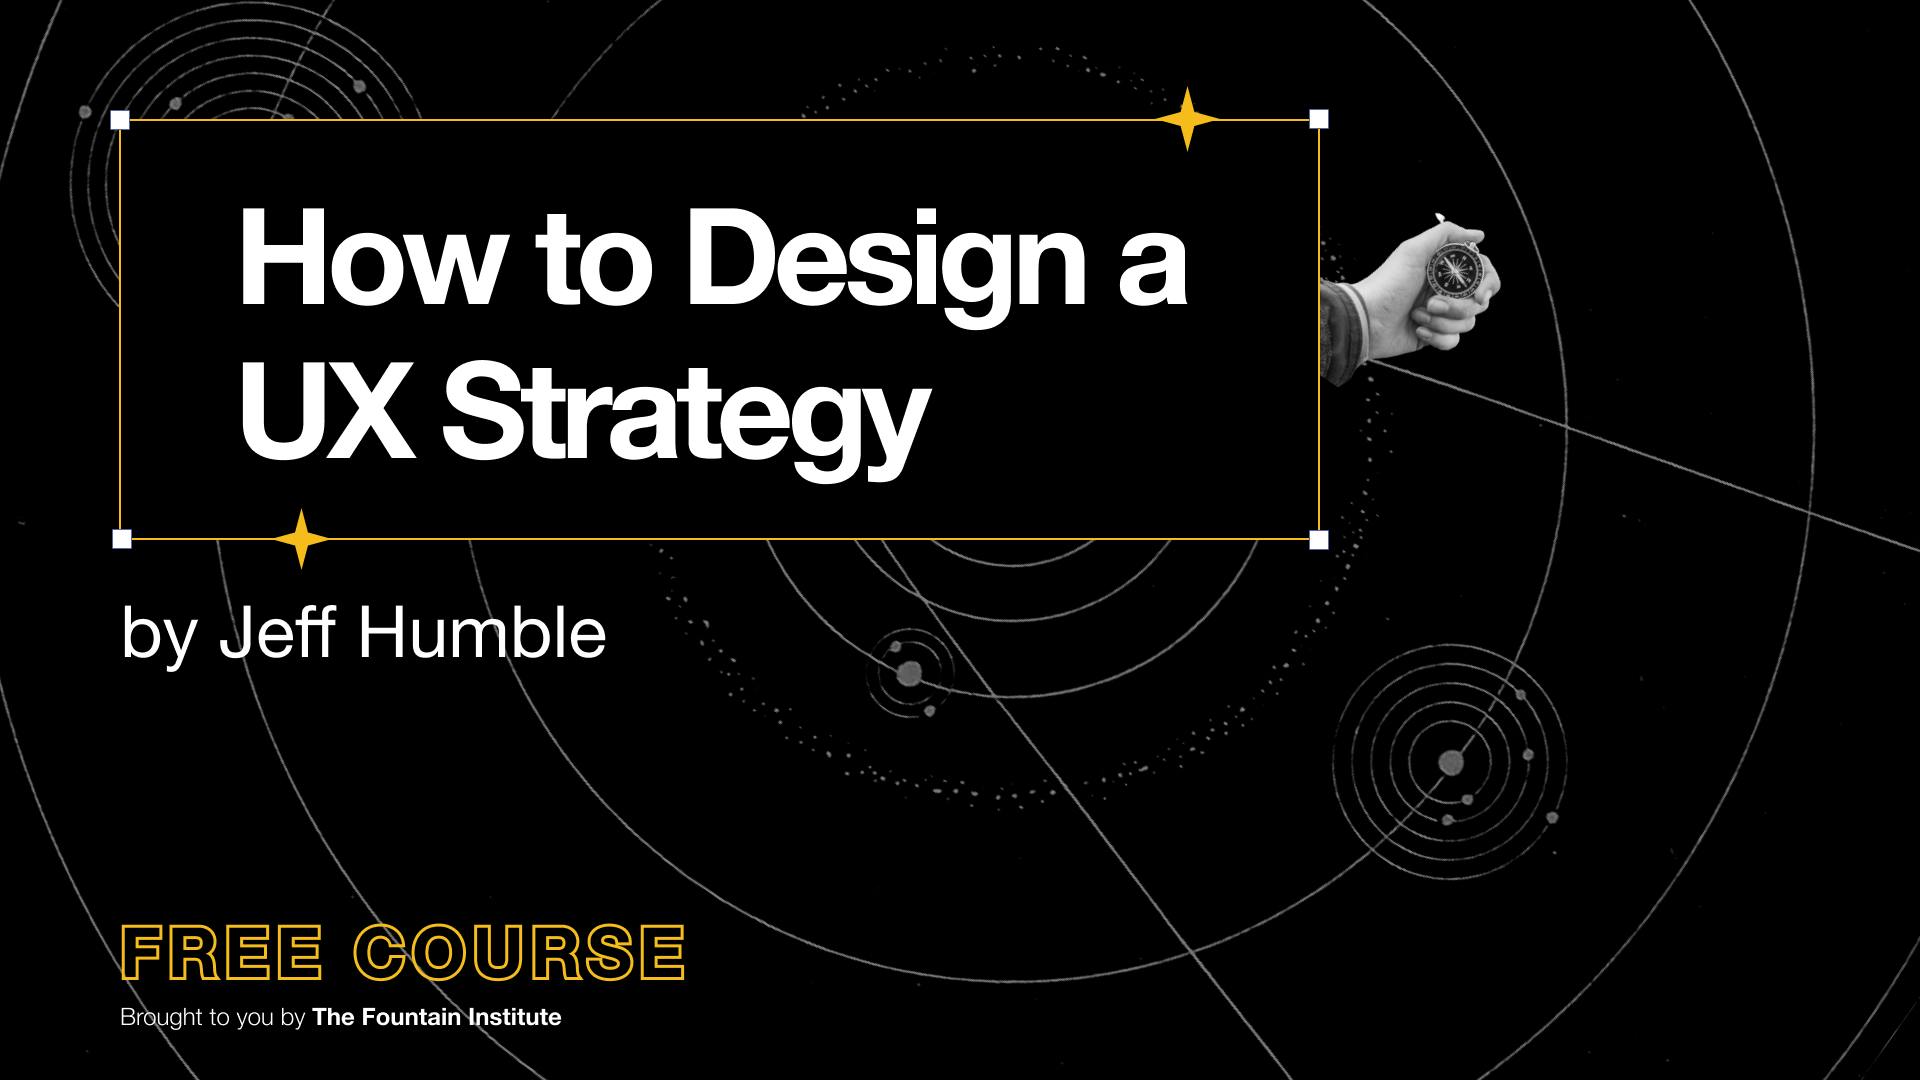 How to design a UX strategy, a free course on YouTube